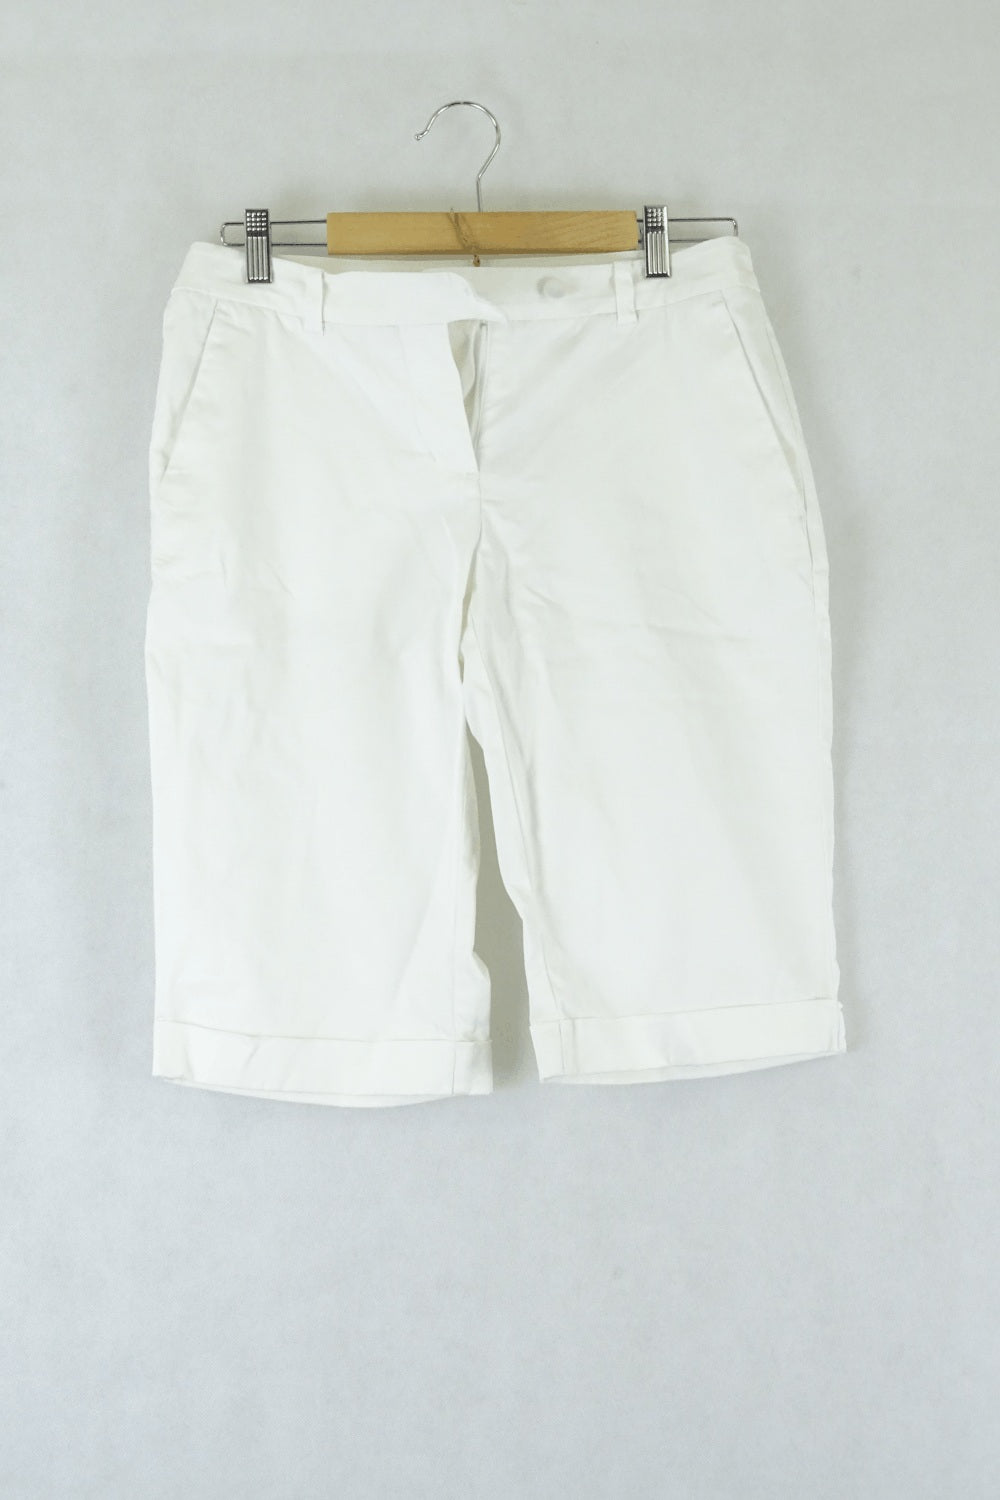 Country Road White Shorts 10